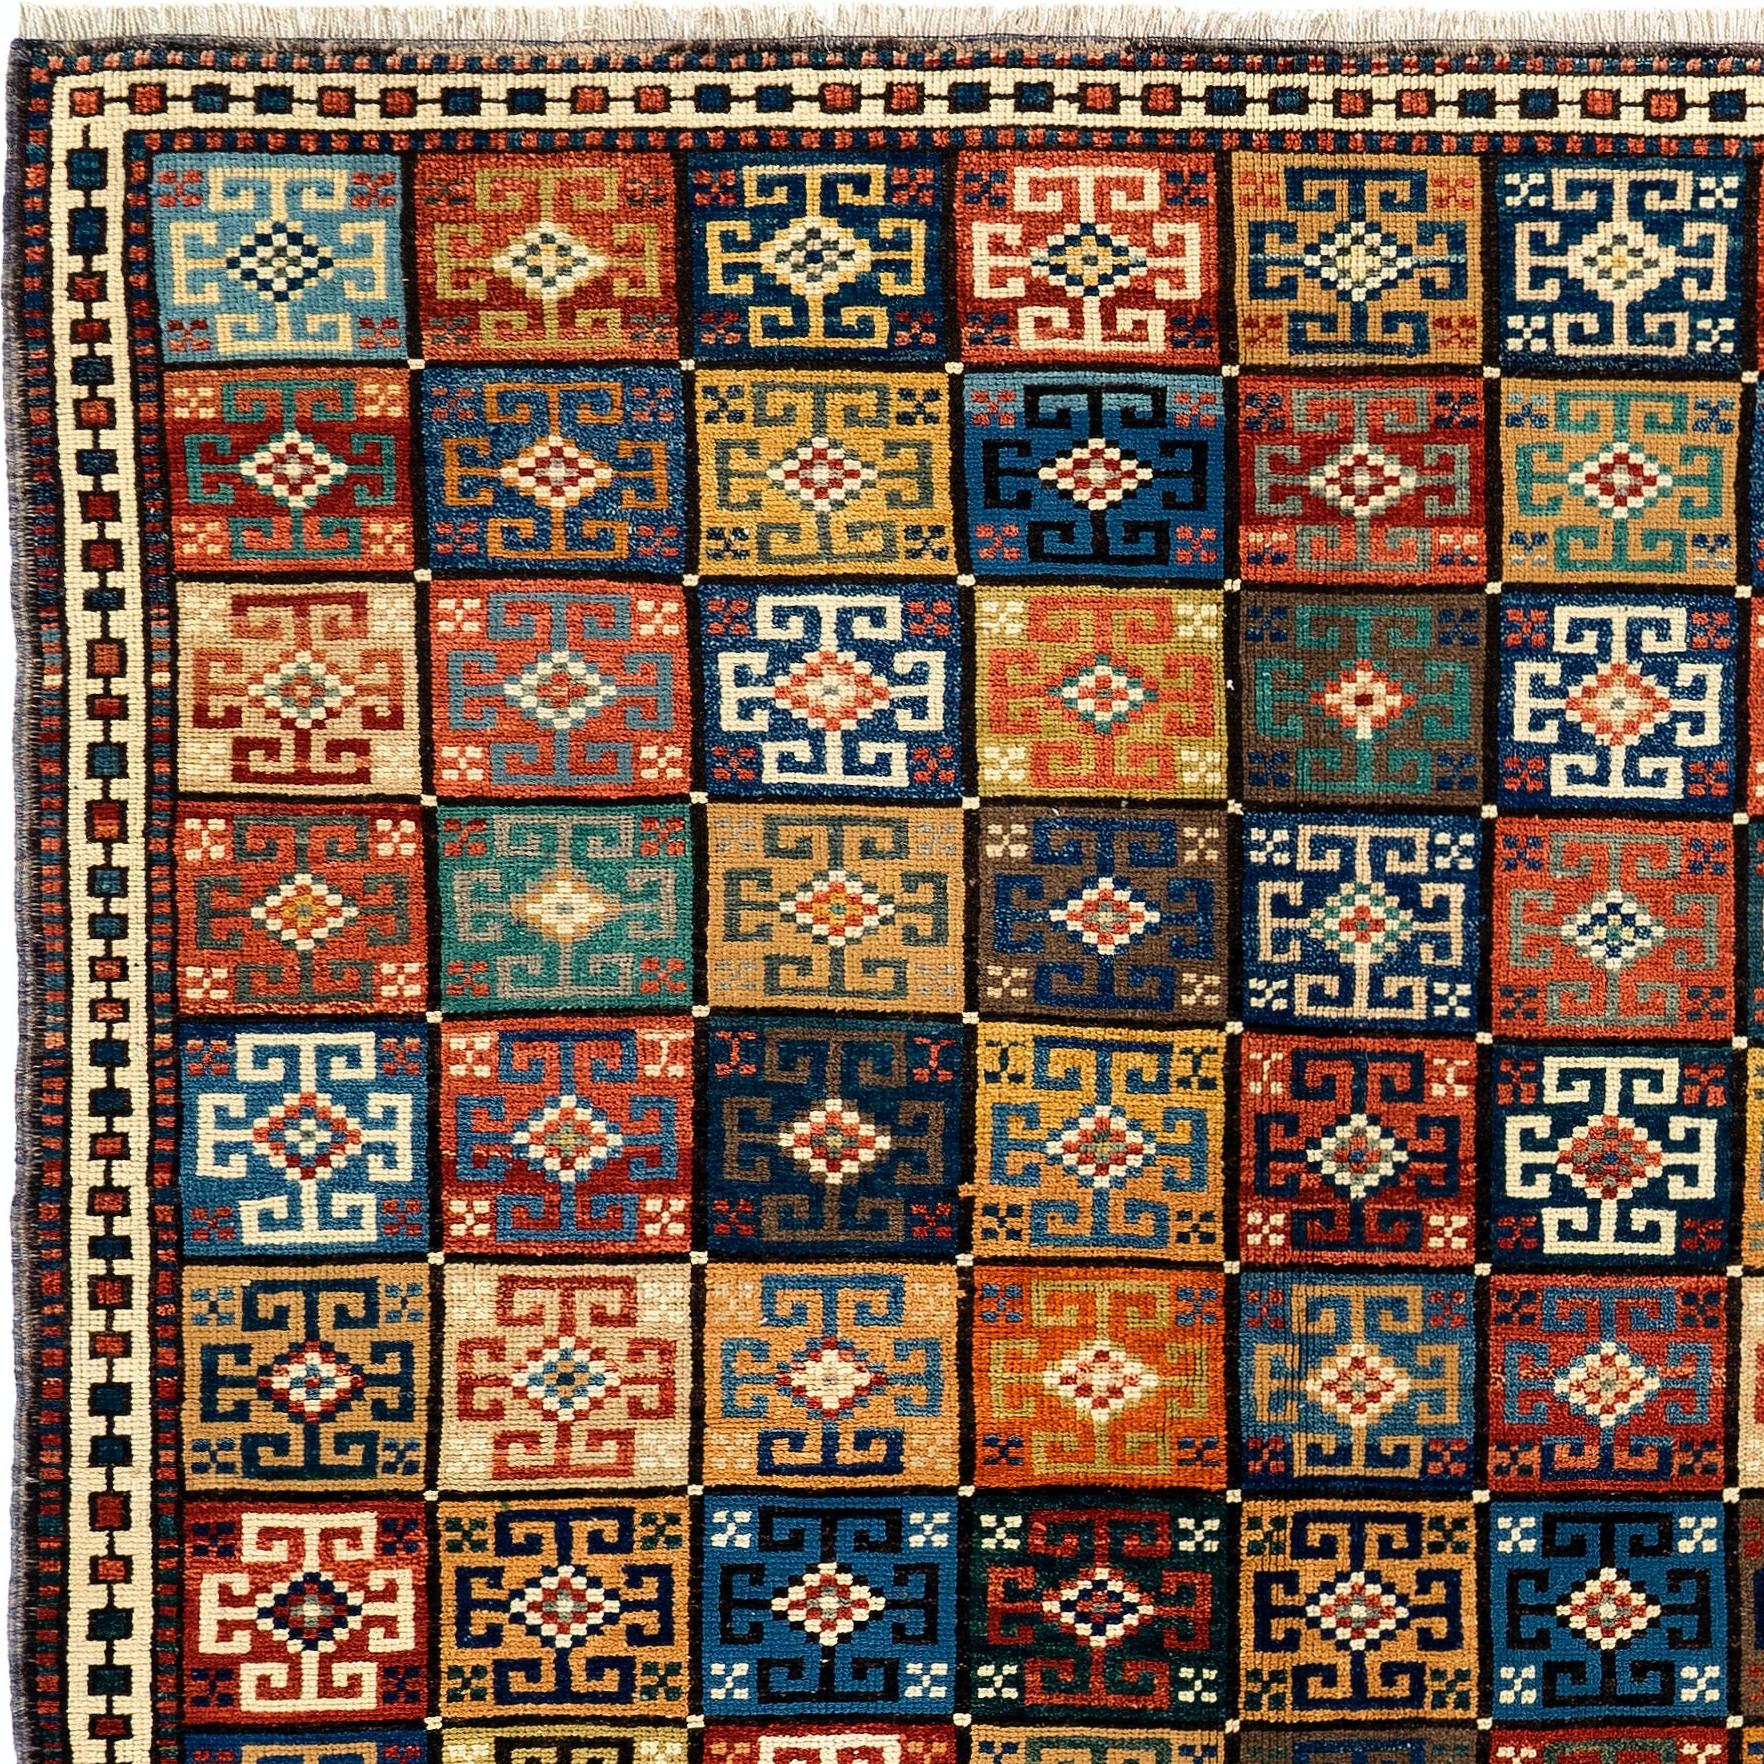 A colorful hand-knotted rug from Turkey with an unusual all-over design of 96 square boxes with flowers in them. Size: 4.7 x 5.8 Ft.
Made of 100% flower, root and plant dyed hand-spun wool.

In excellent condition with even medium pile